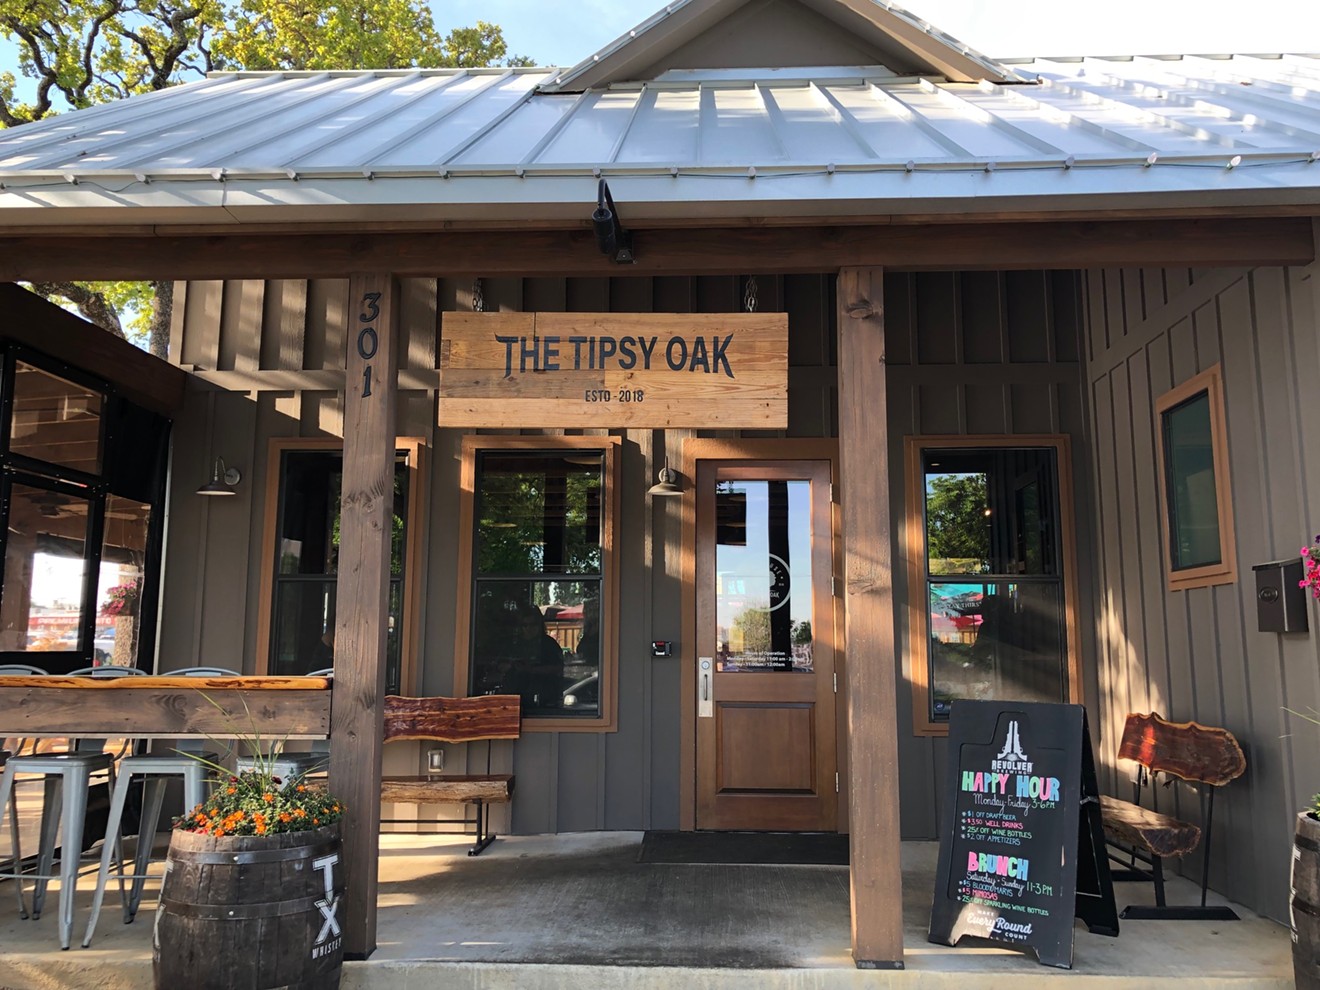 The Tipsy Oak opened last year in Arlington with live music, a solid craft beer selection and gorgeous outdoor space.